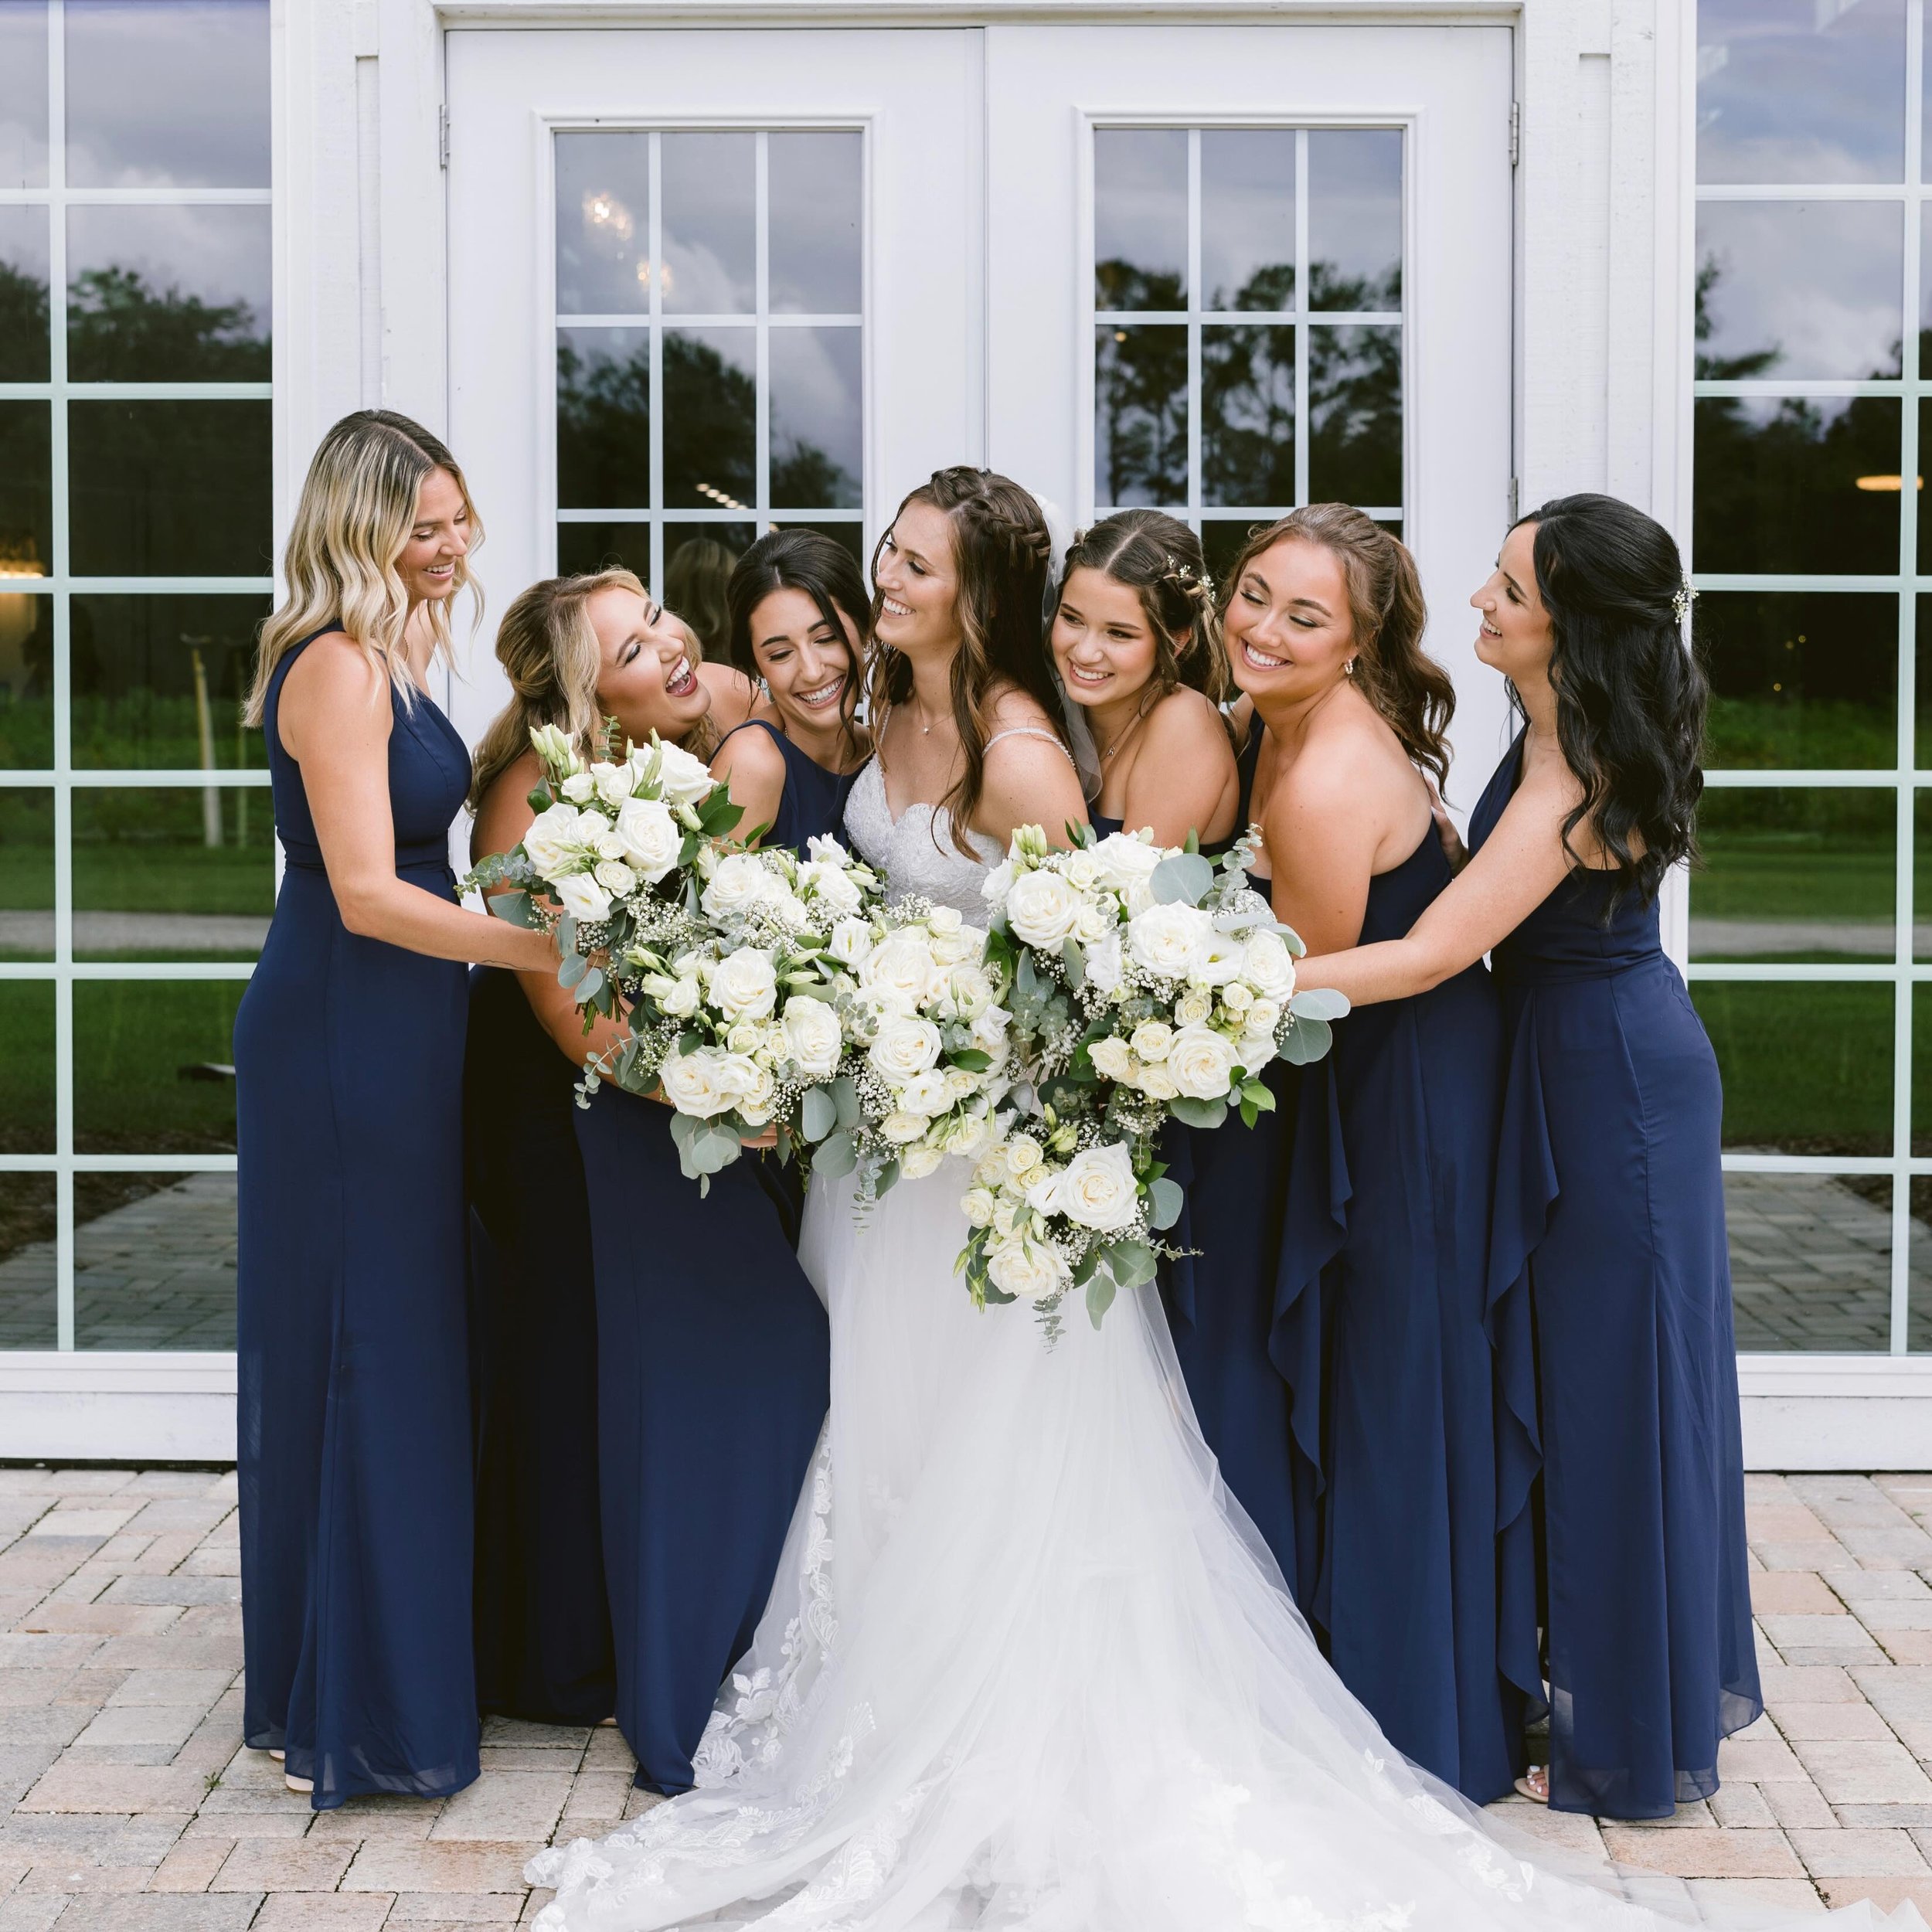 Apparently to some, choosing a song for a static post is annoying? Please let me know below if you prefer a song with my posts or silence. I'm ok with both 😅

#bridalparty
#weddinday 
#getmarried 
#floridaweddings 
#brides
#wedding 

Image from 2nd 